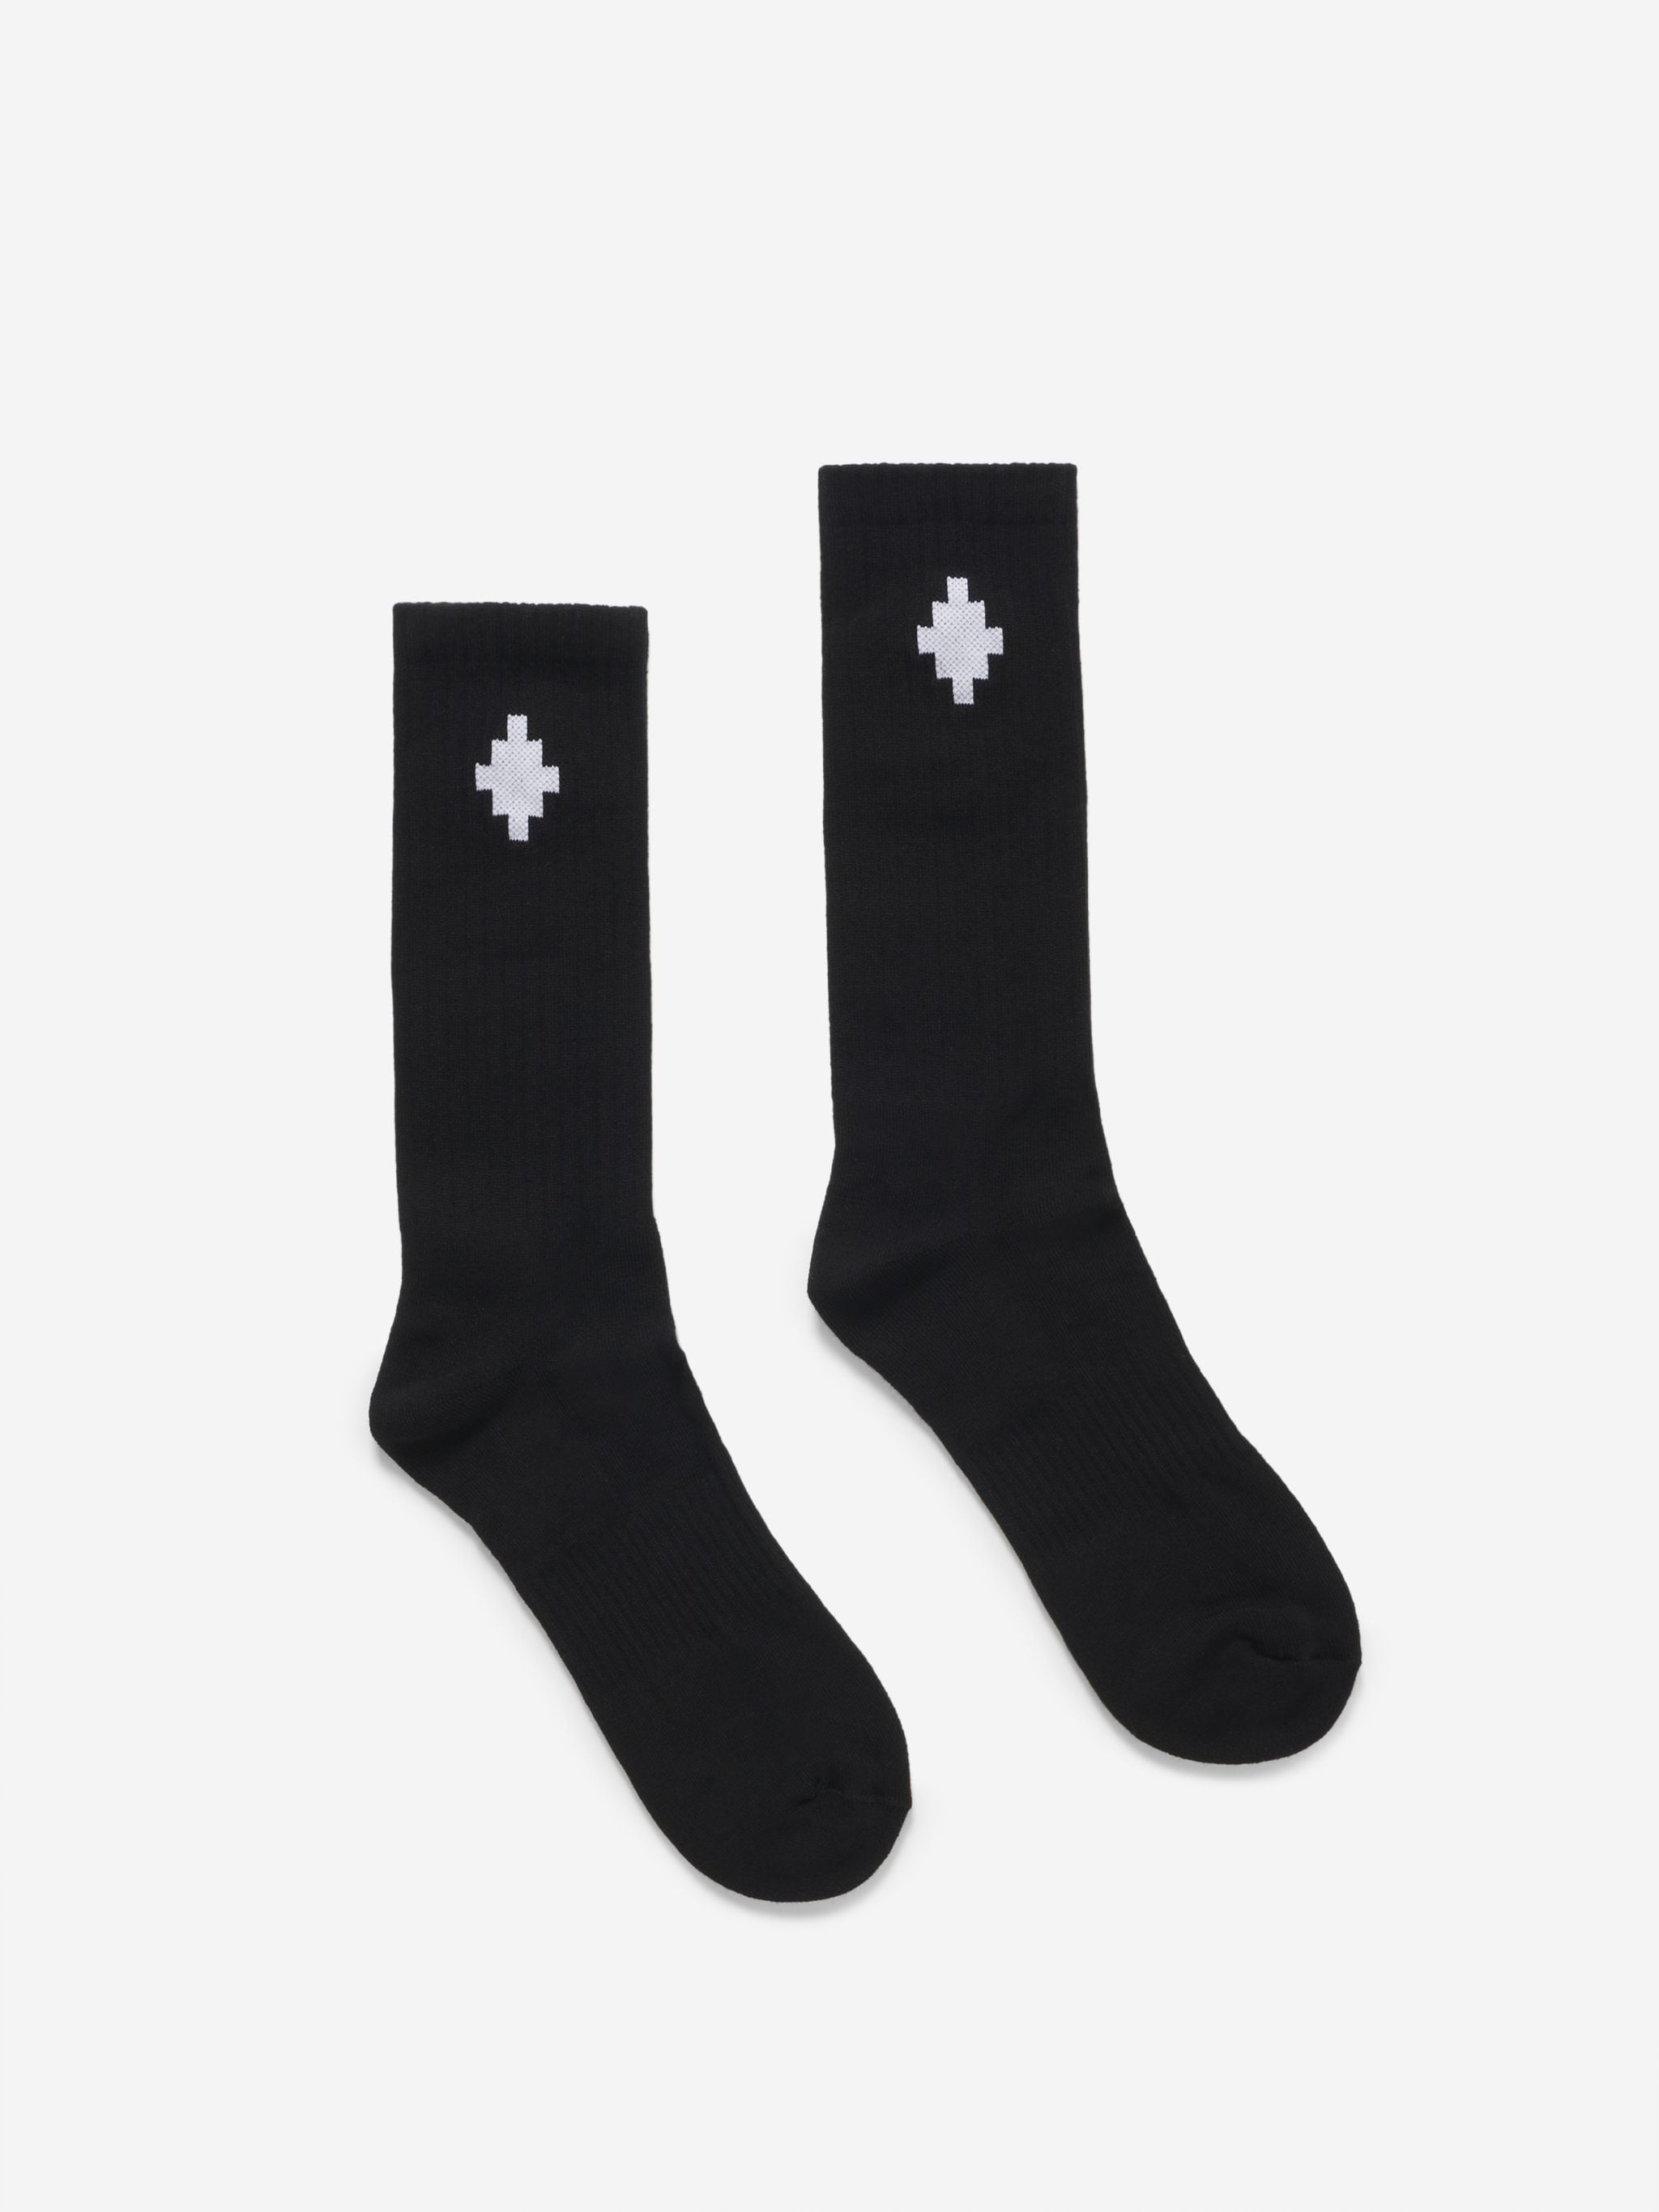 Black cotton-blend Cross ankle-high socks from Marcelo Burlon County of Milan featuring signature Cross motif, ribbed cuffs and long length. Be sure before opening, as socks and hosiery can only be returned in their original, unopened packaging..